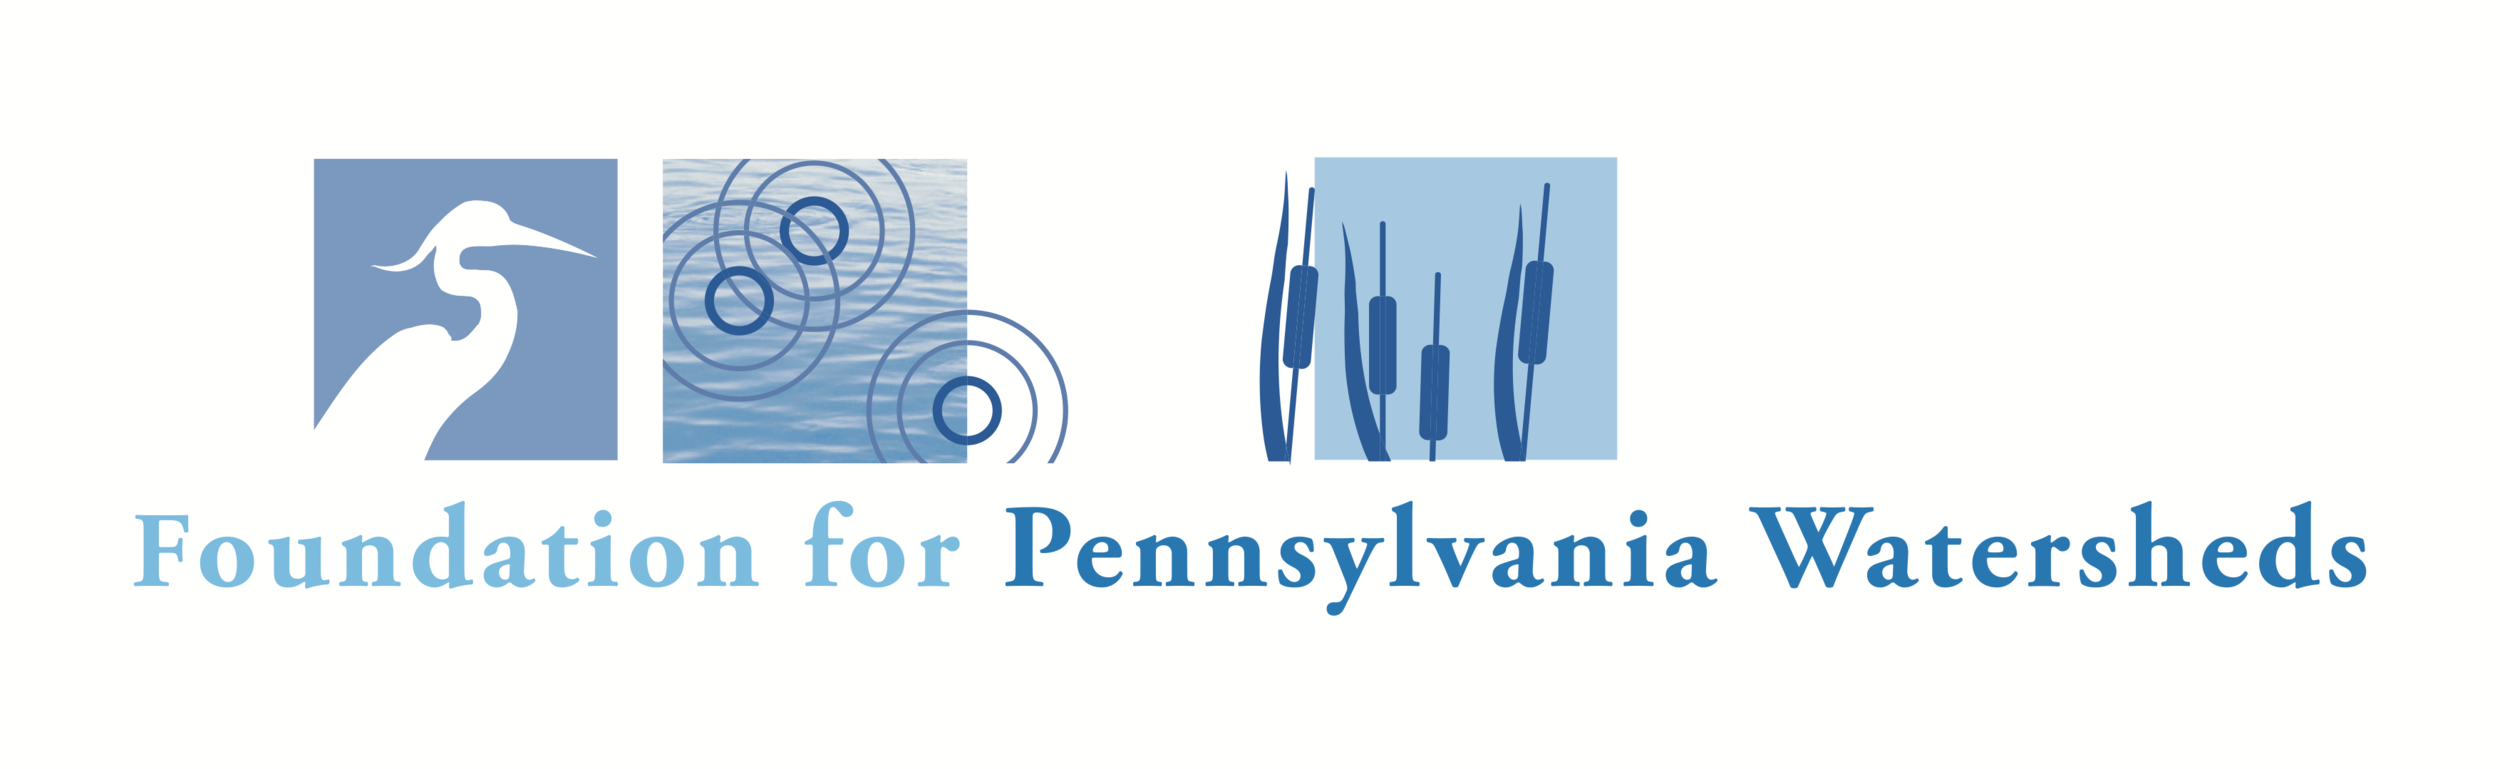 Foundation for PA Watersheds logo _ Png.png